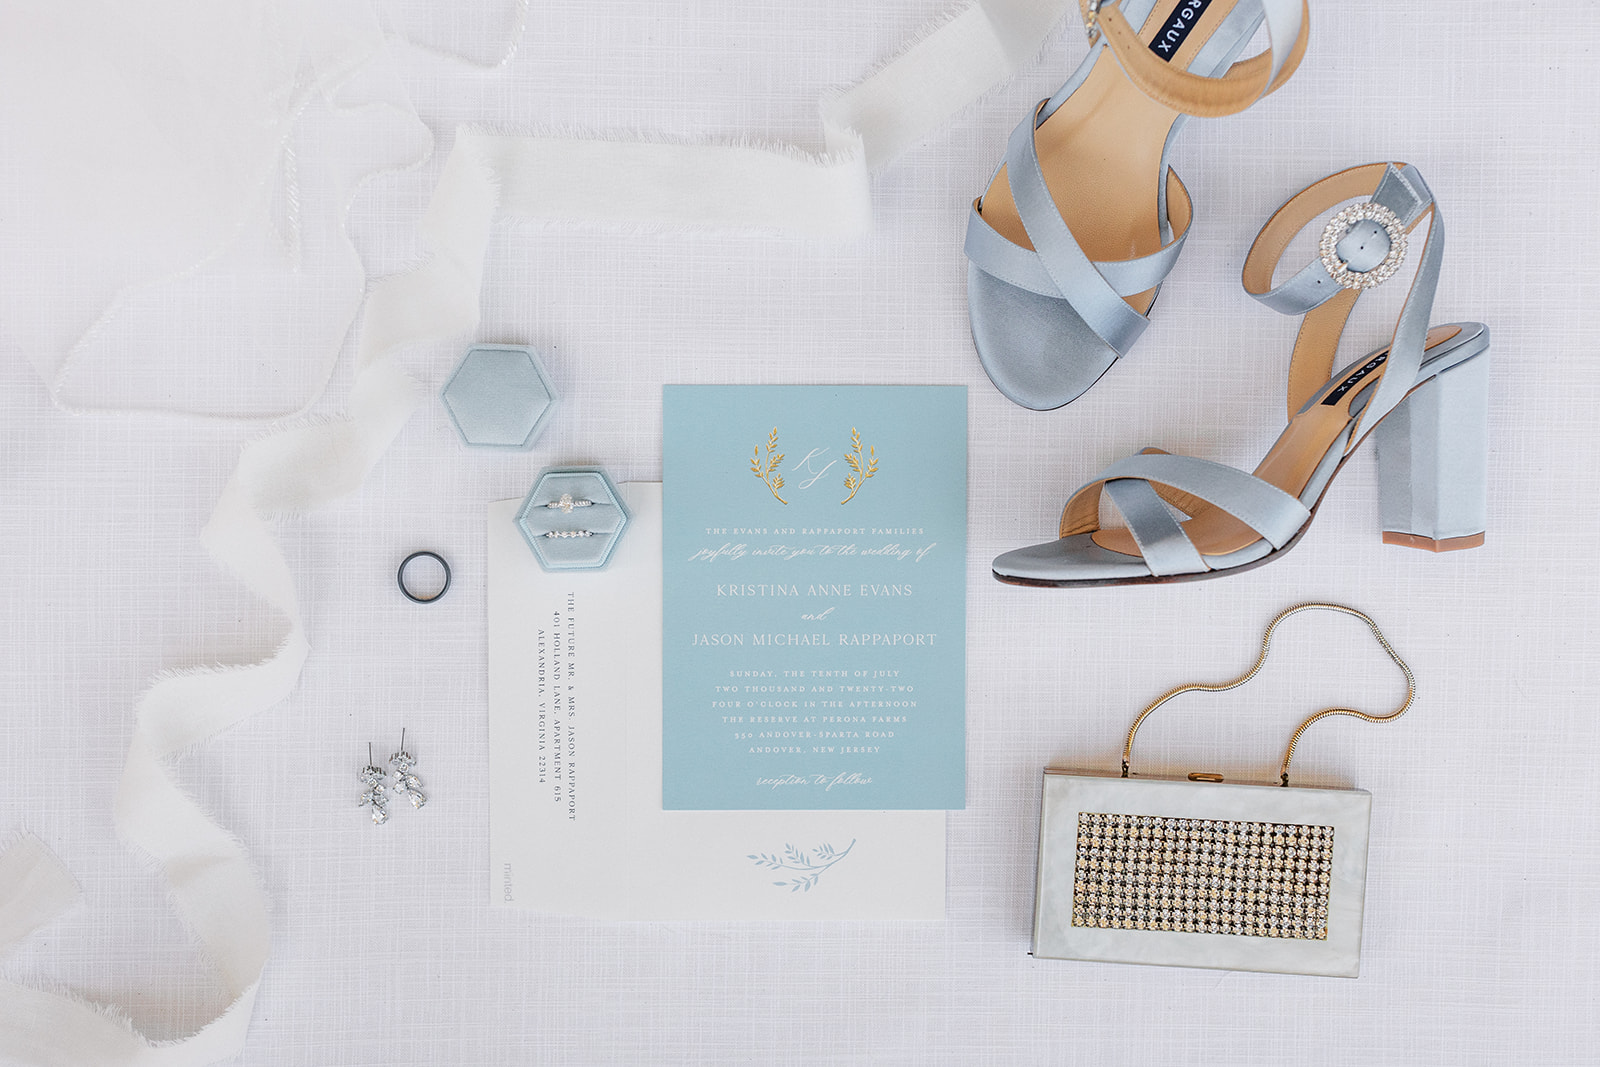 Bridal details of a purse, shoes, rings and earrings sit on a table with invitations